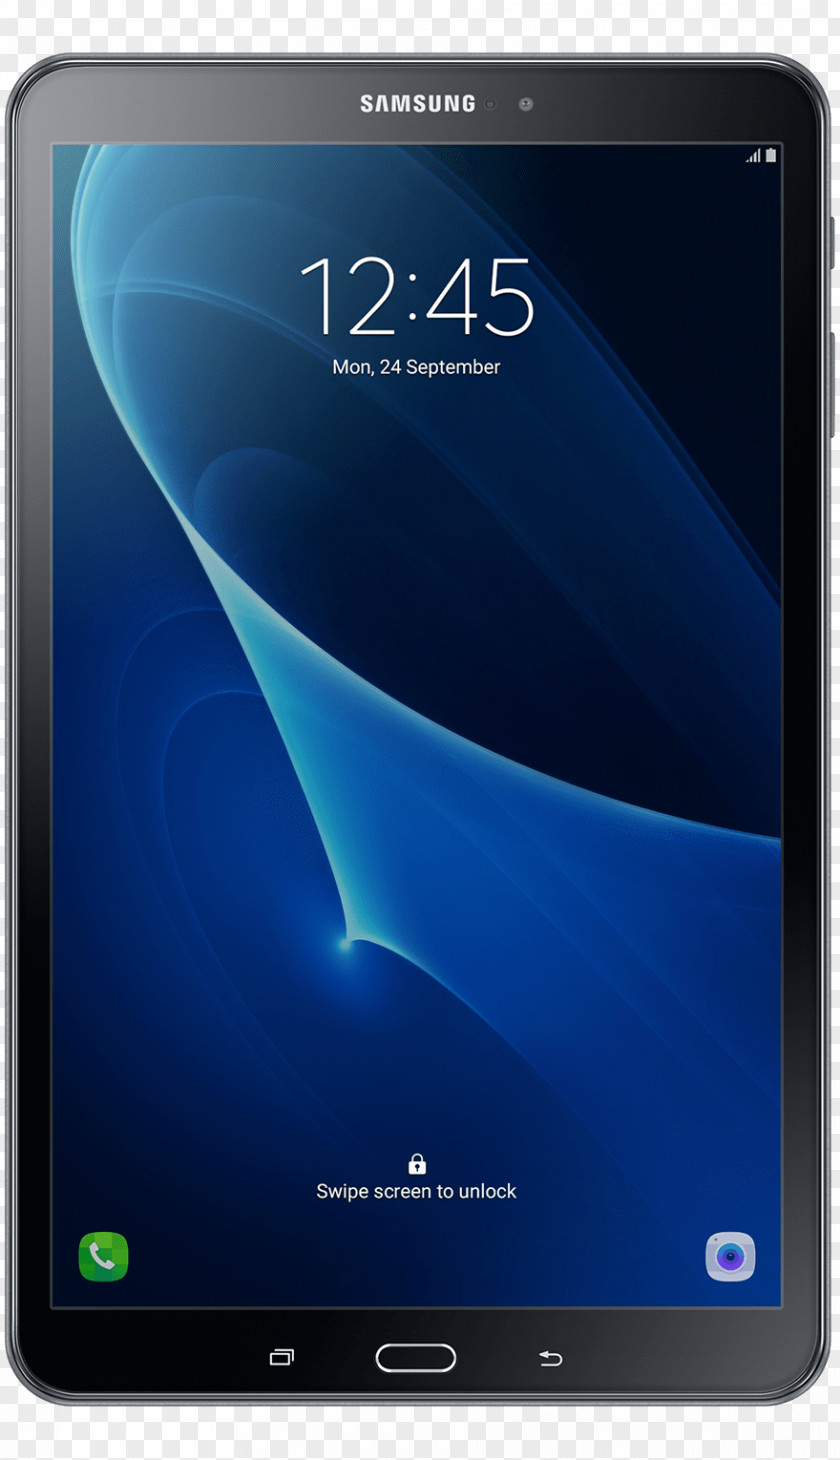 Samsung Galaxy Tab 10.1 Android Wi-Fi LTE PNG